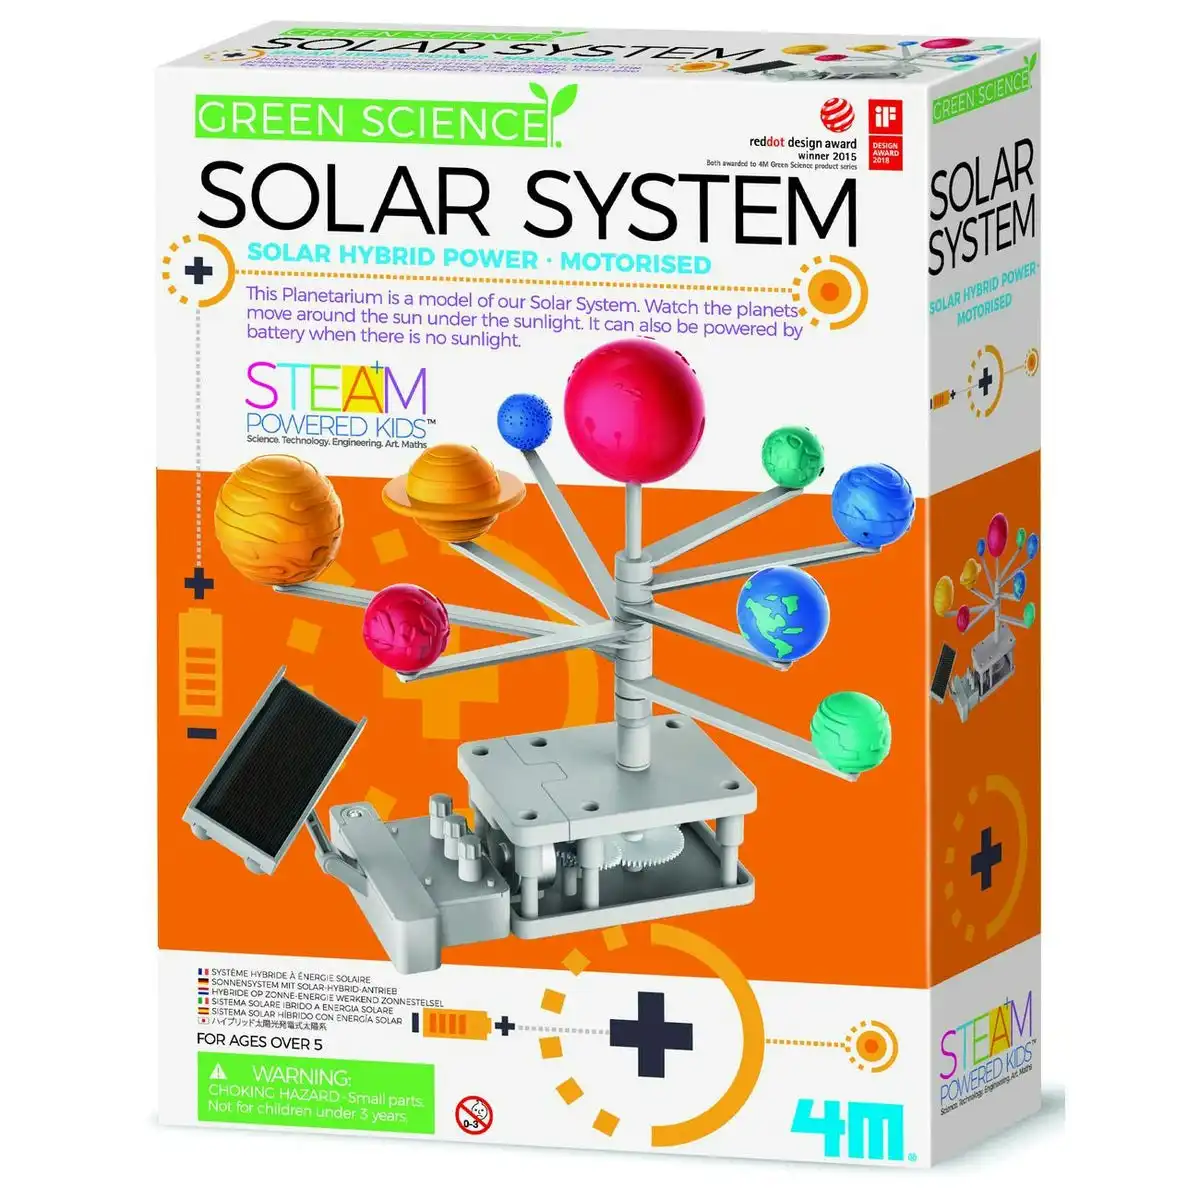 4M - Steam-powered Kids - Green Science Solar System - Green Energy